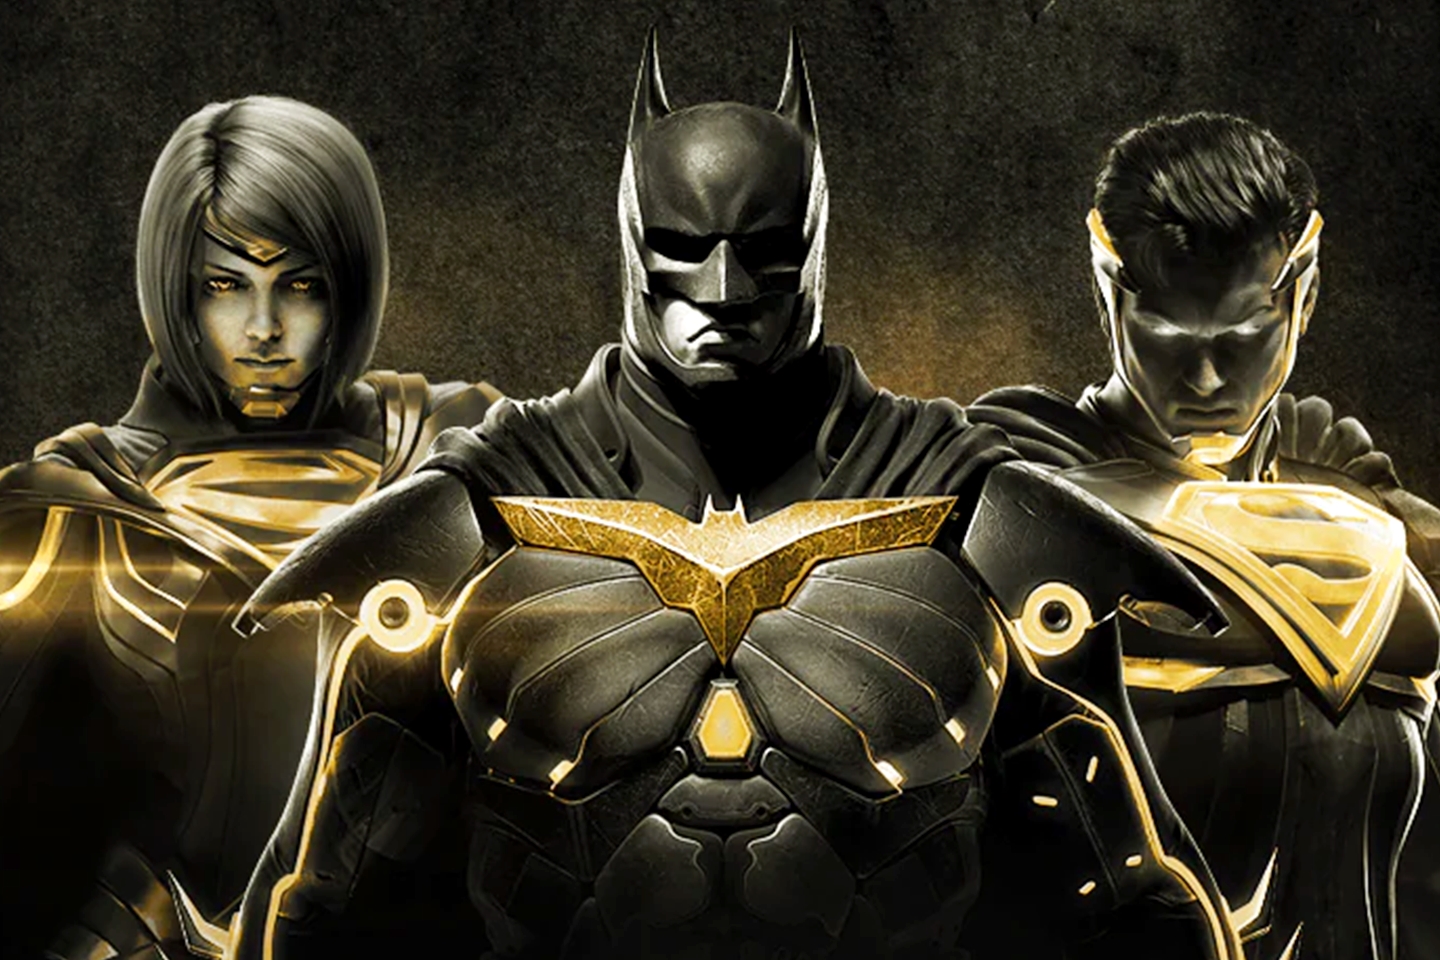 Will the new DC Studios have a connection to Injustice 3?